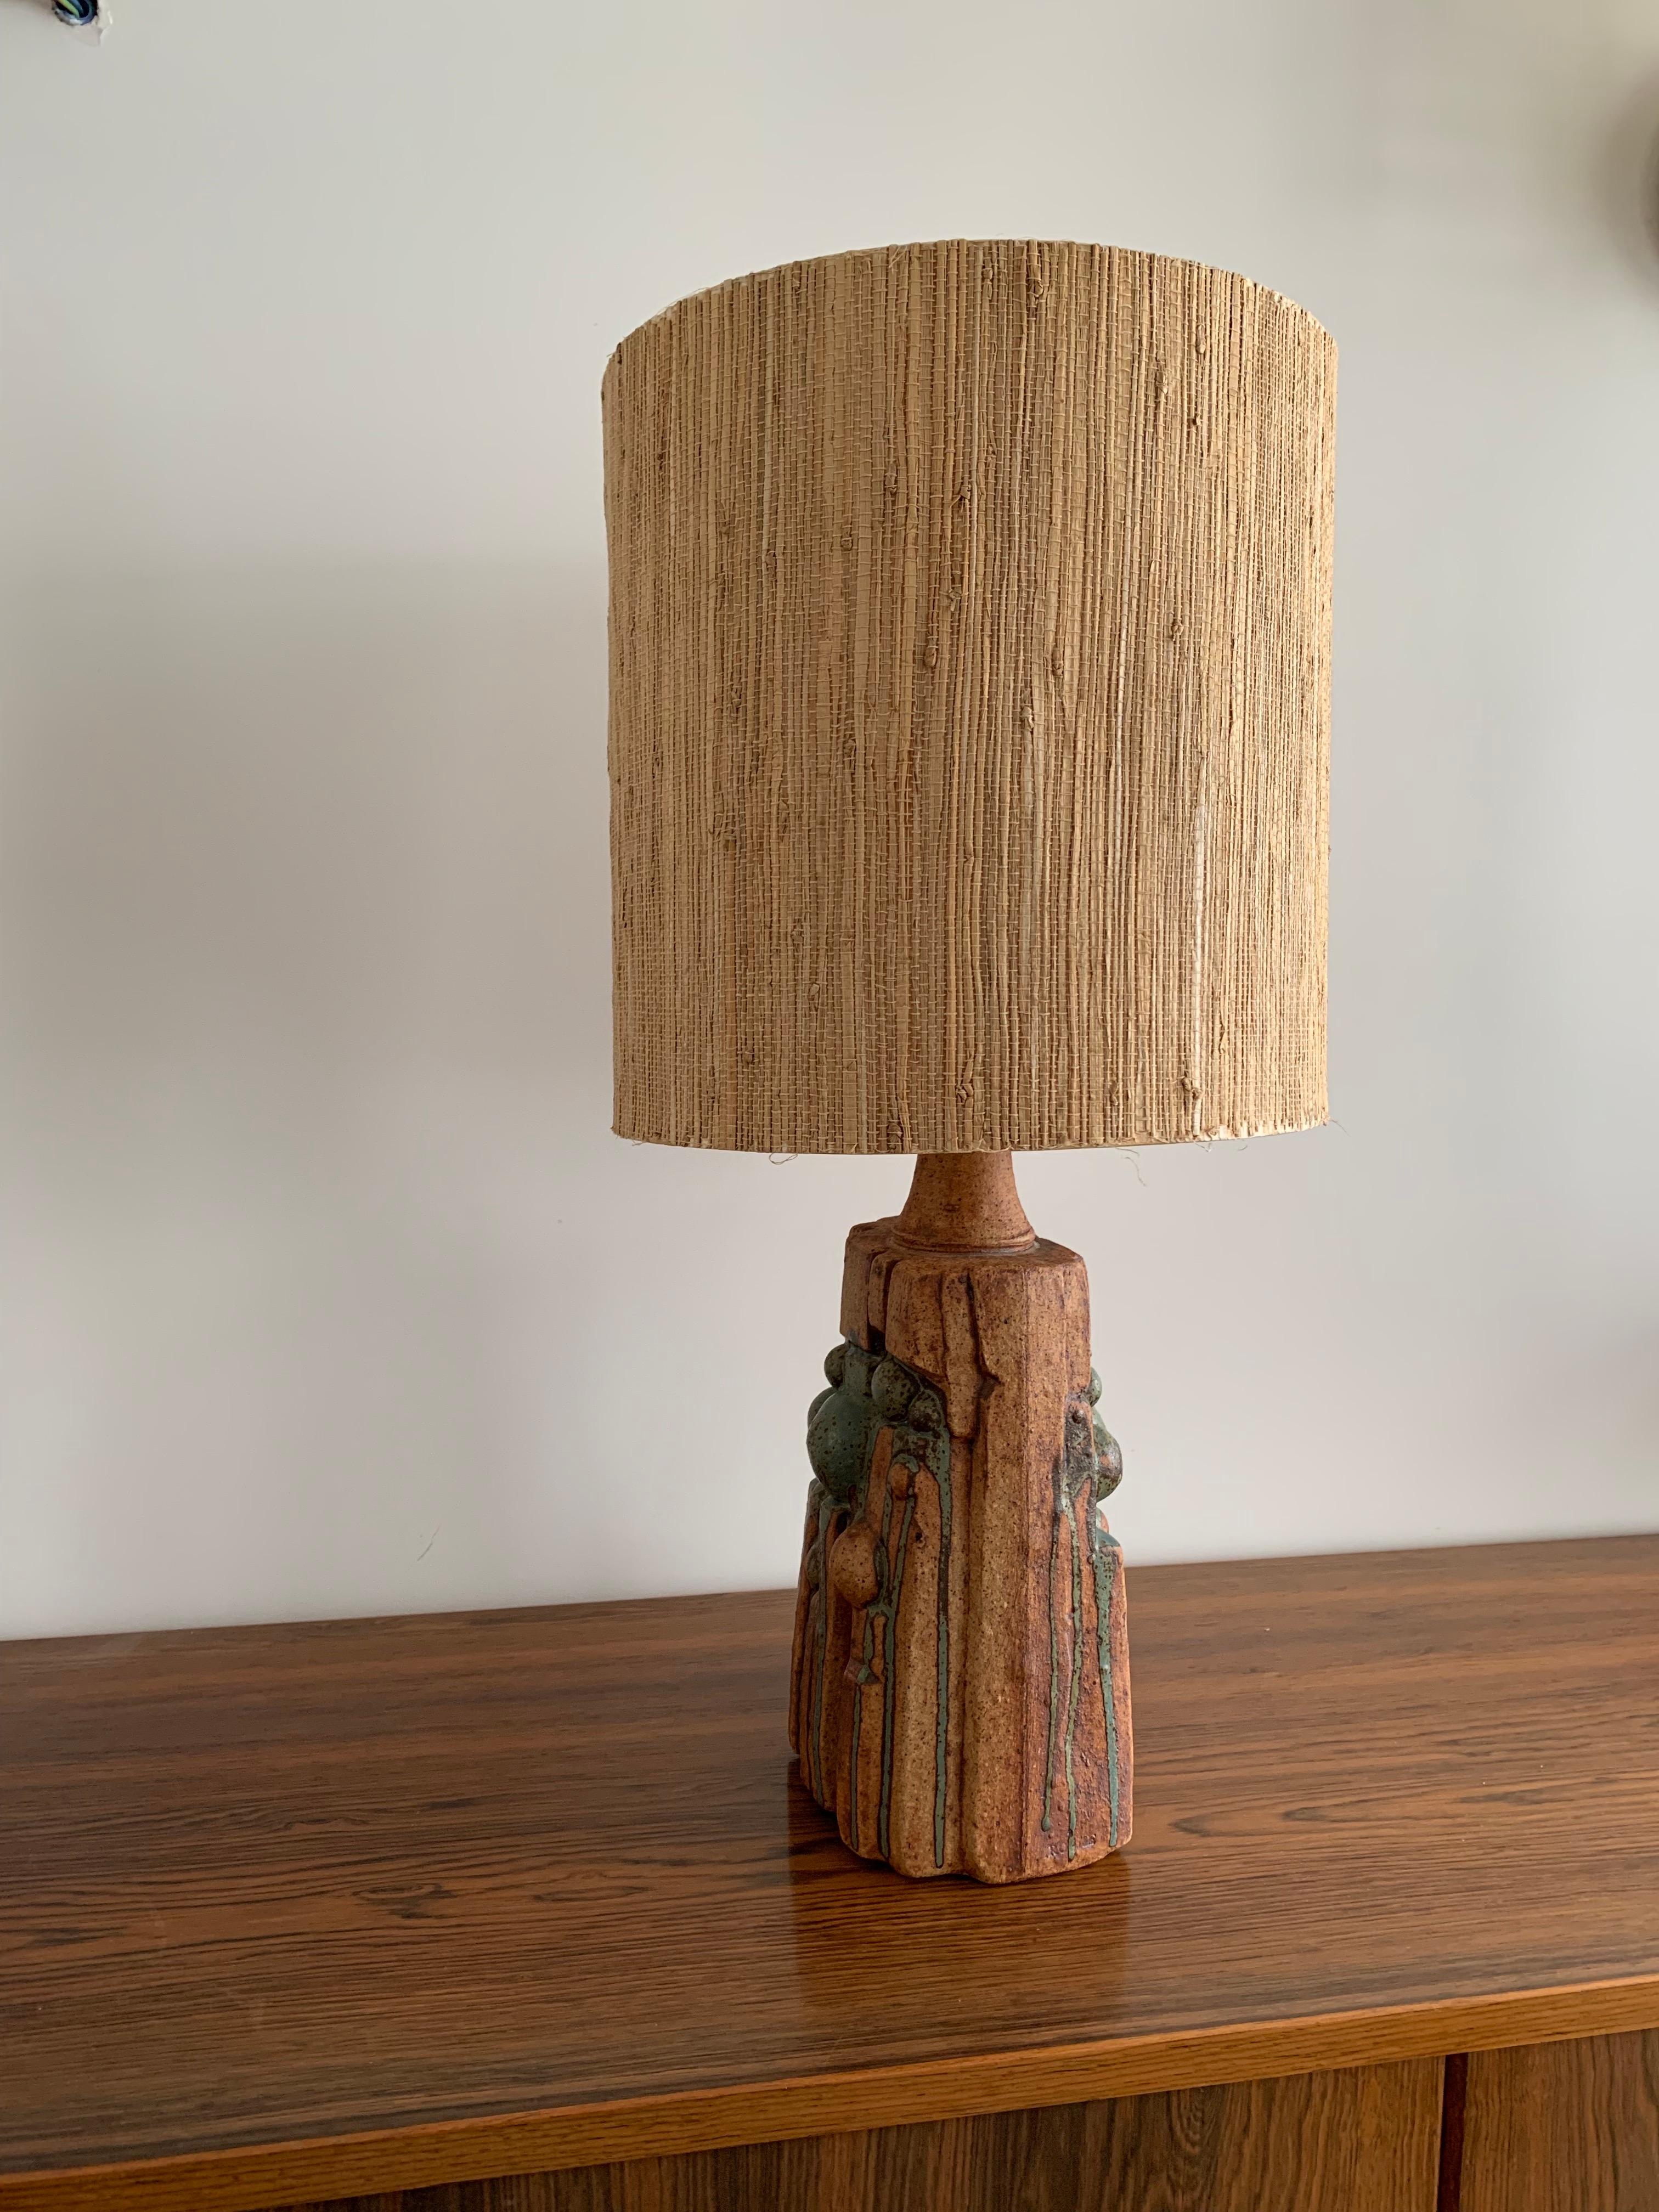 Bernard Rooke Ceramic Table Lamp England 1960 Signed In Good Condition For Sale In Paris, FR